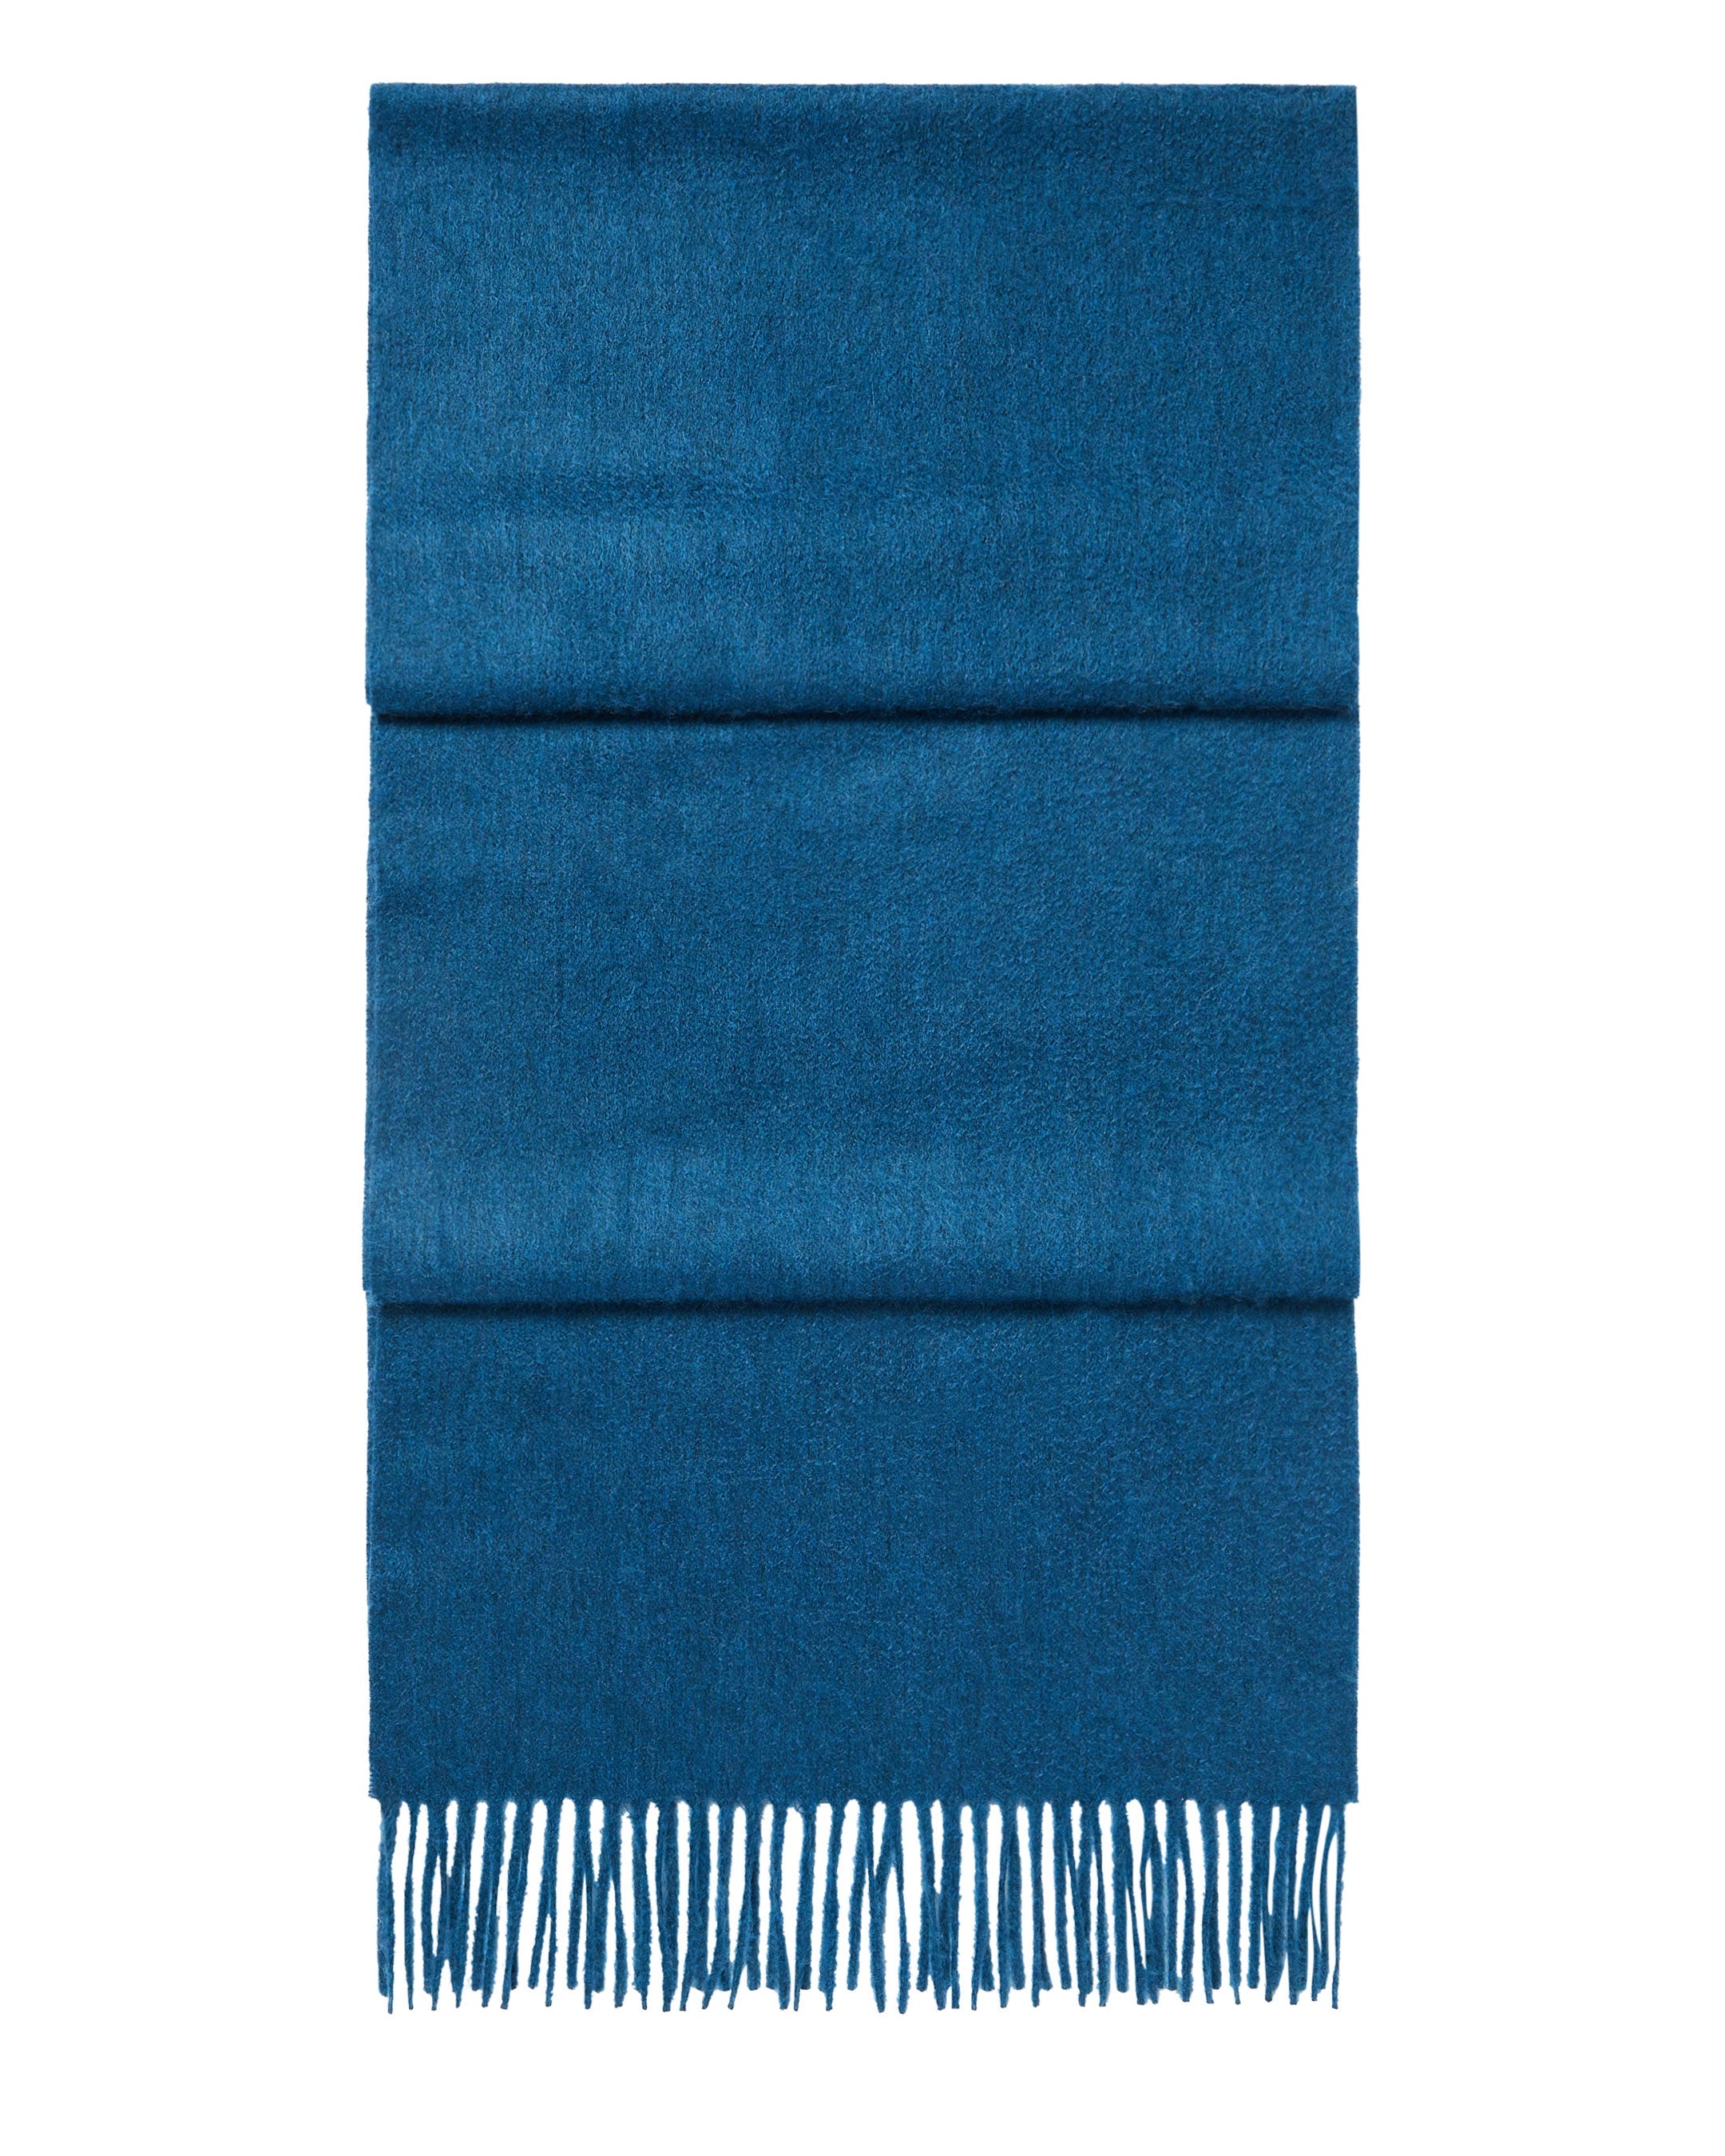 Our Cashmere Scarf Collection - Women's Cashmere Scarves | N.Peal